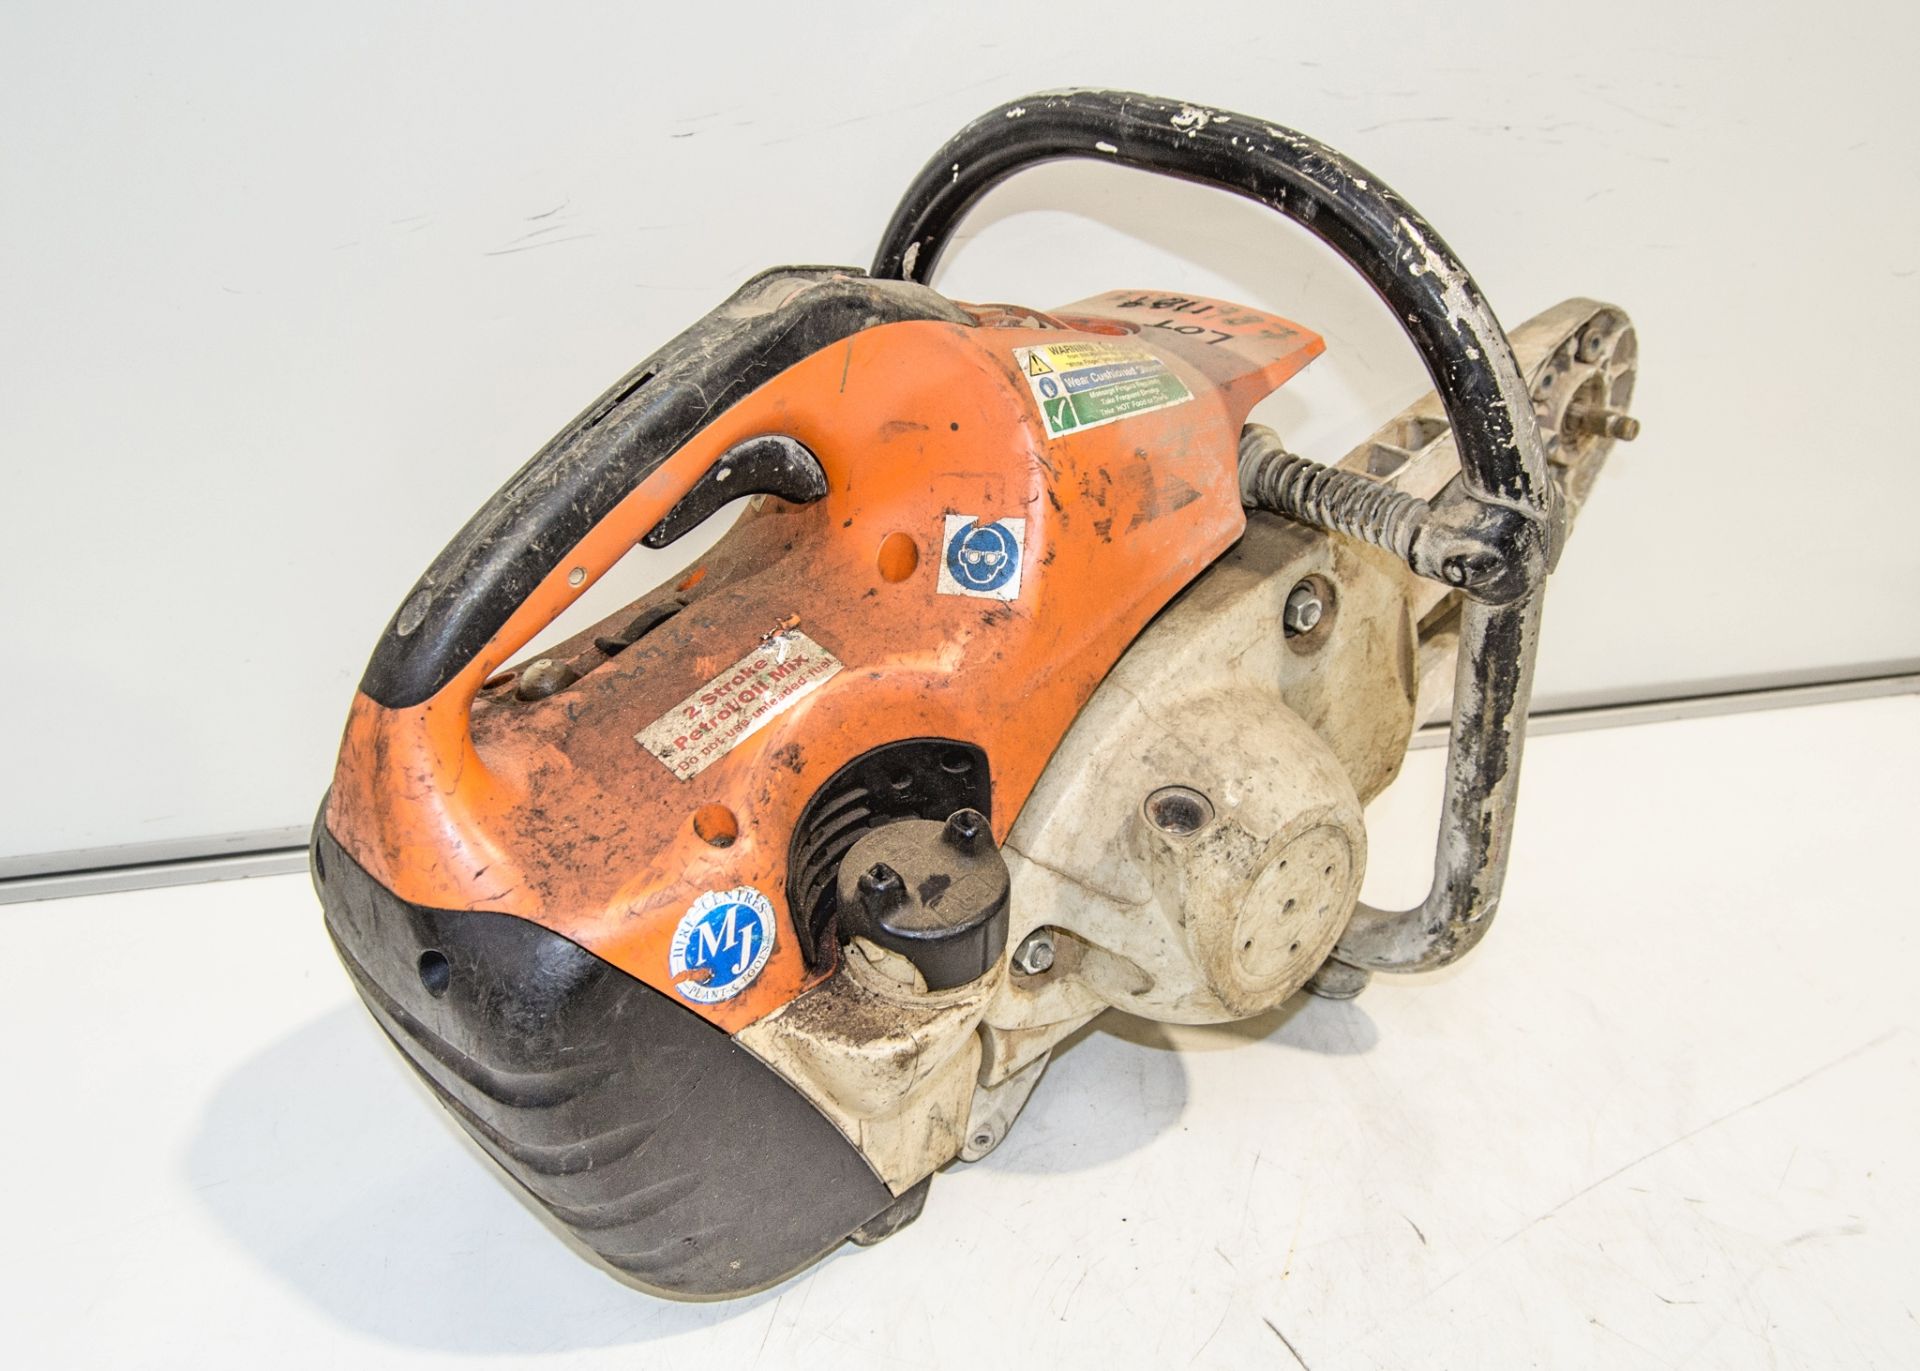 Stihl TS410 petrol driven cut off saw for spares E324987 - Image 2 of 2